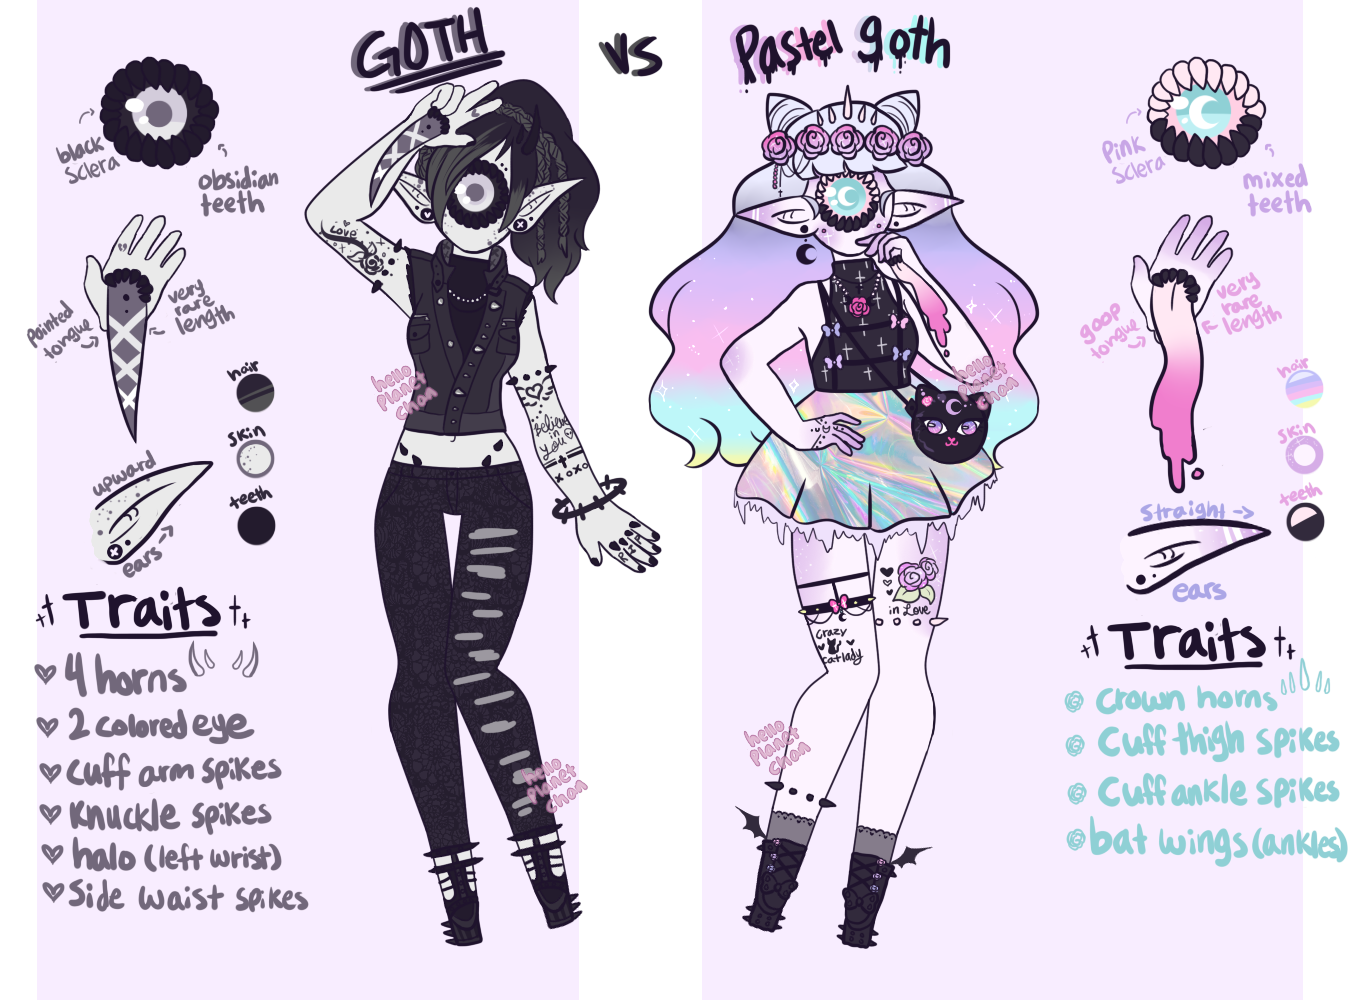 Goth vs Pastel Goth Xyns [pending] by hello-planet-cat on DeviantArt